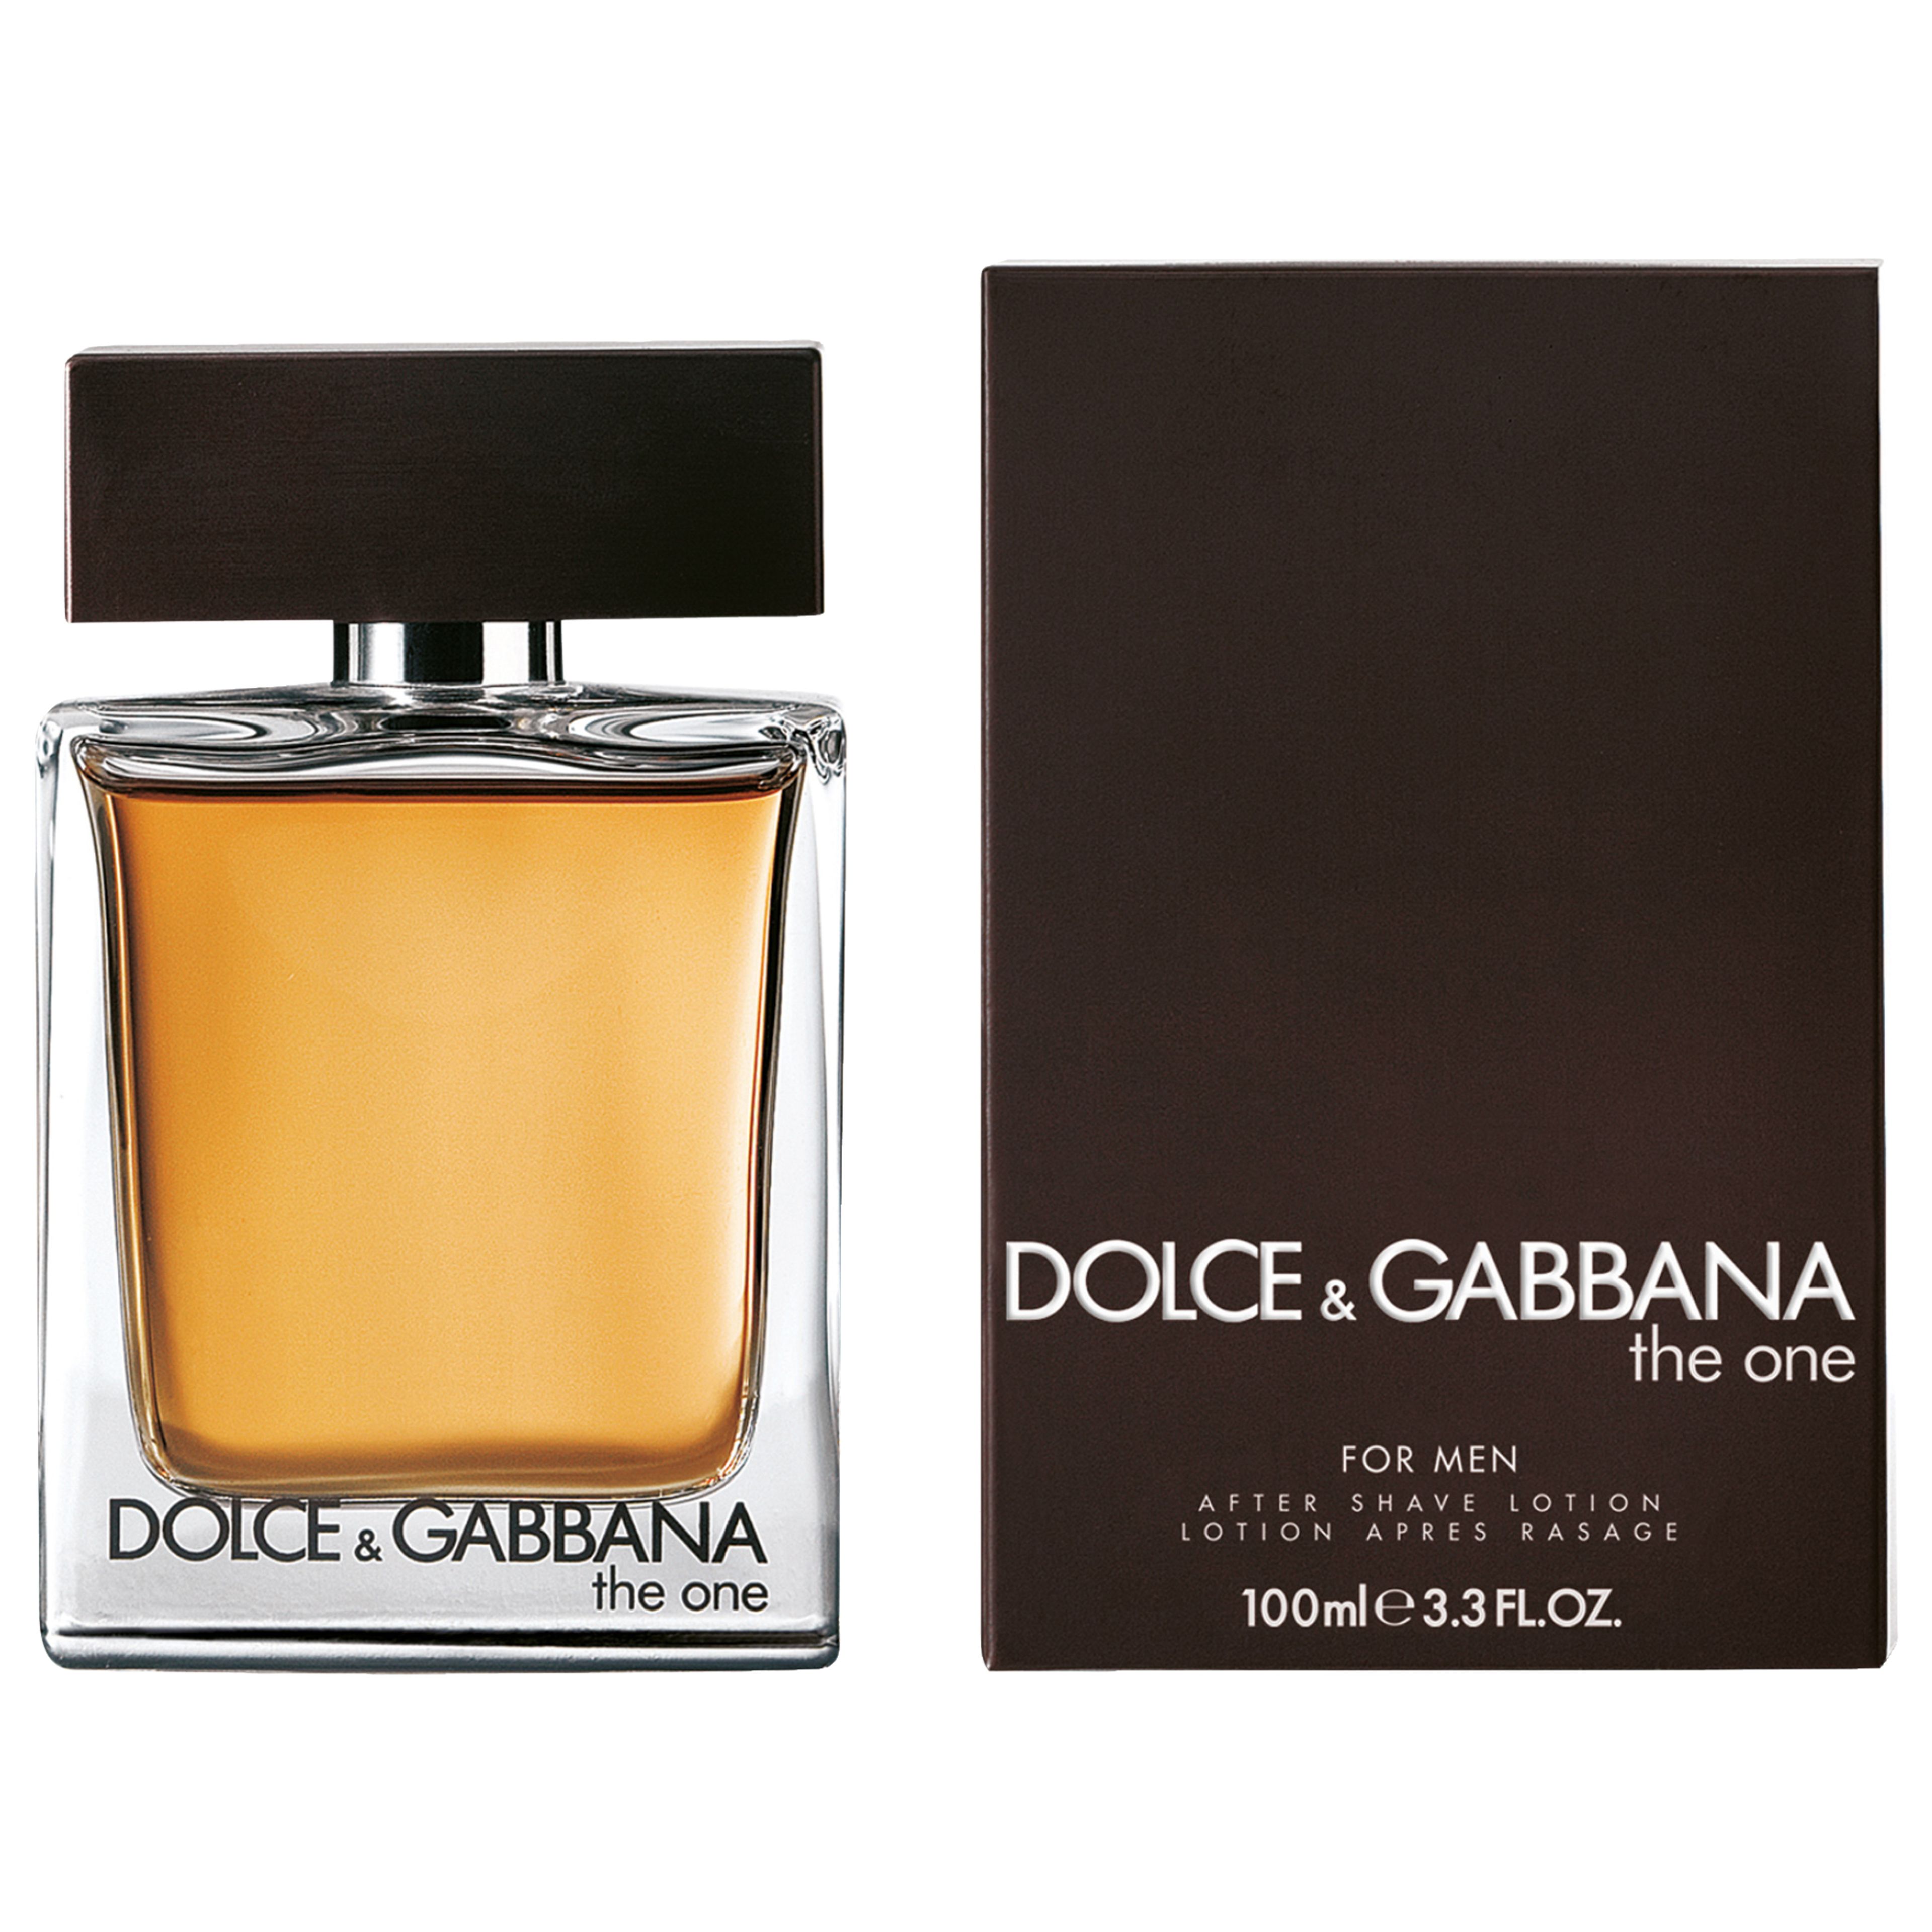 Dolce & Gabbana The One For Men After Shave Lotion 2